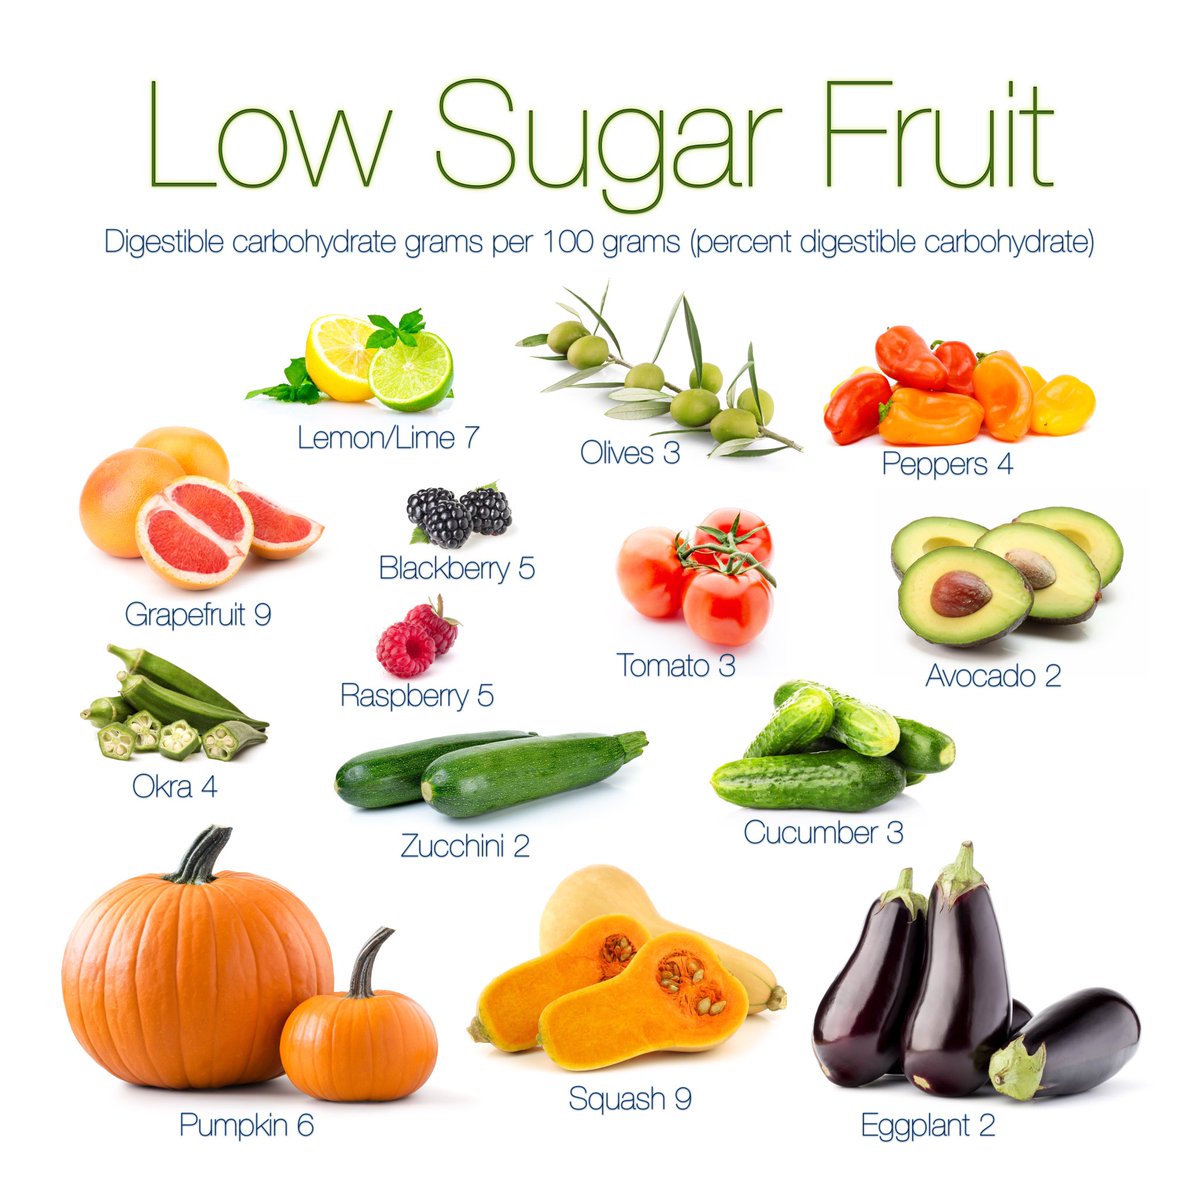 Fruits with 0 sugar